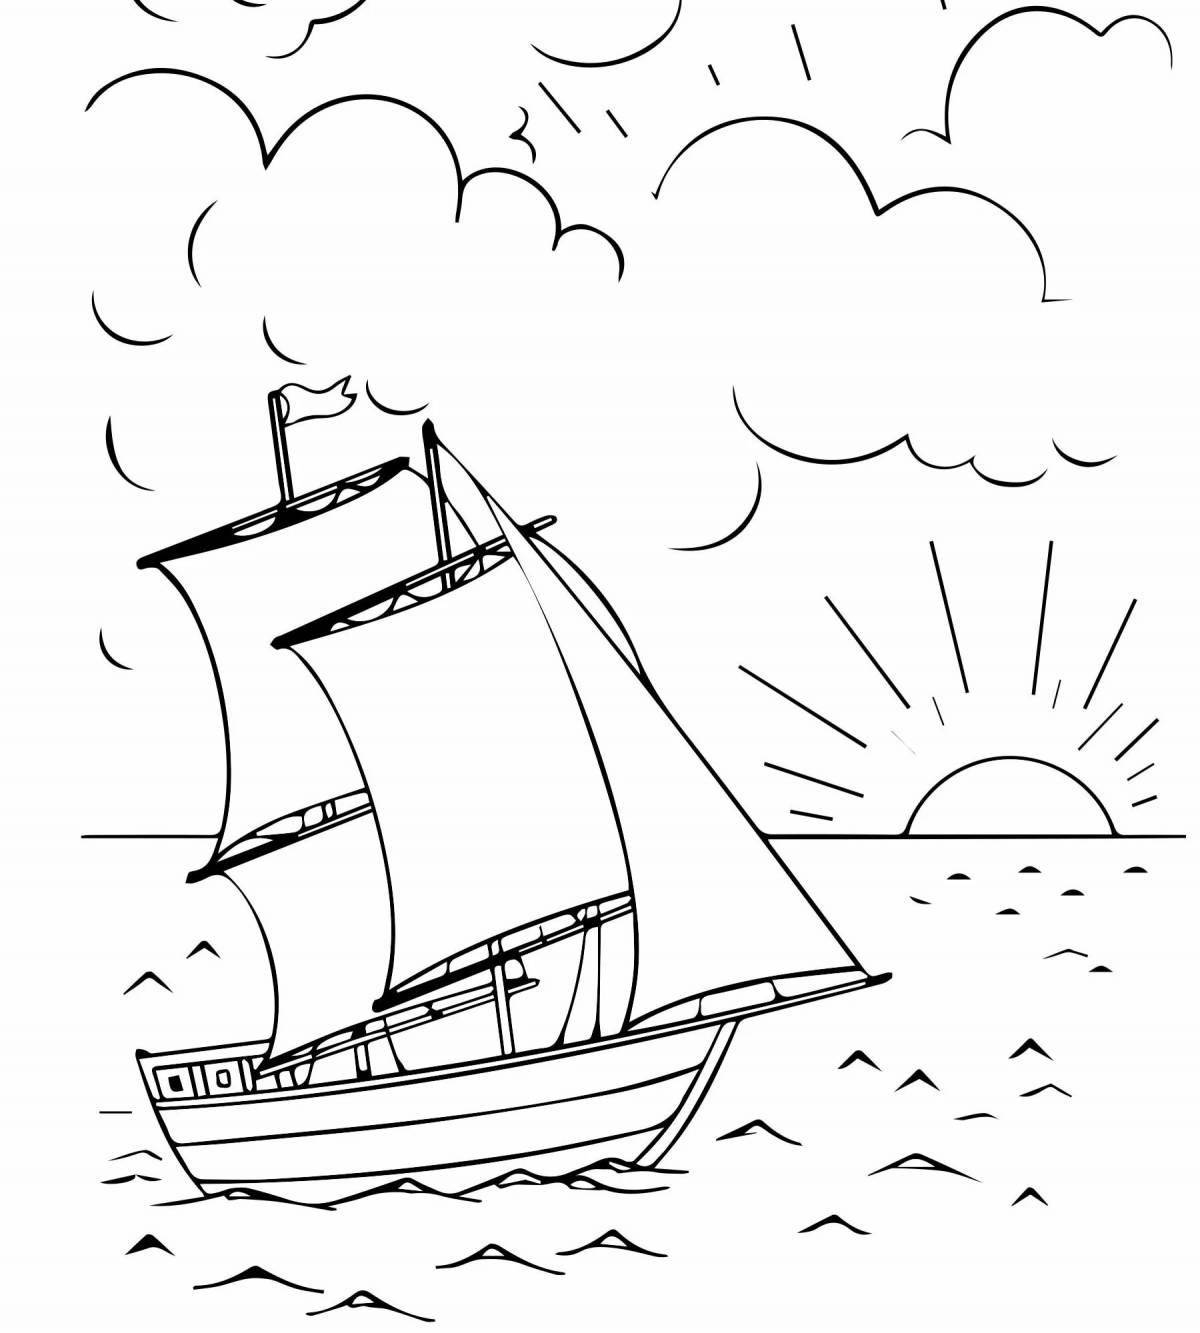 Ship with sails #12